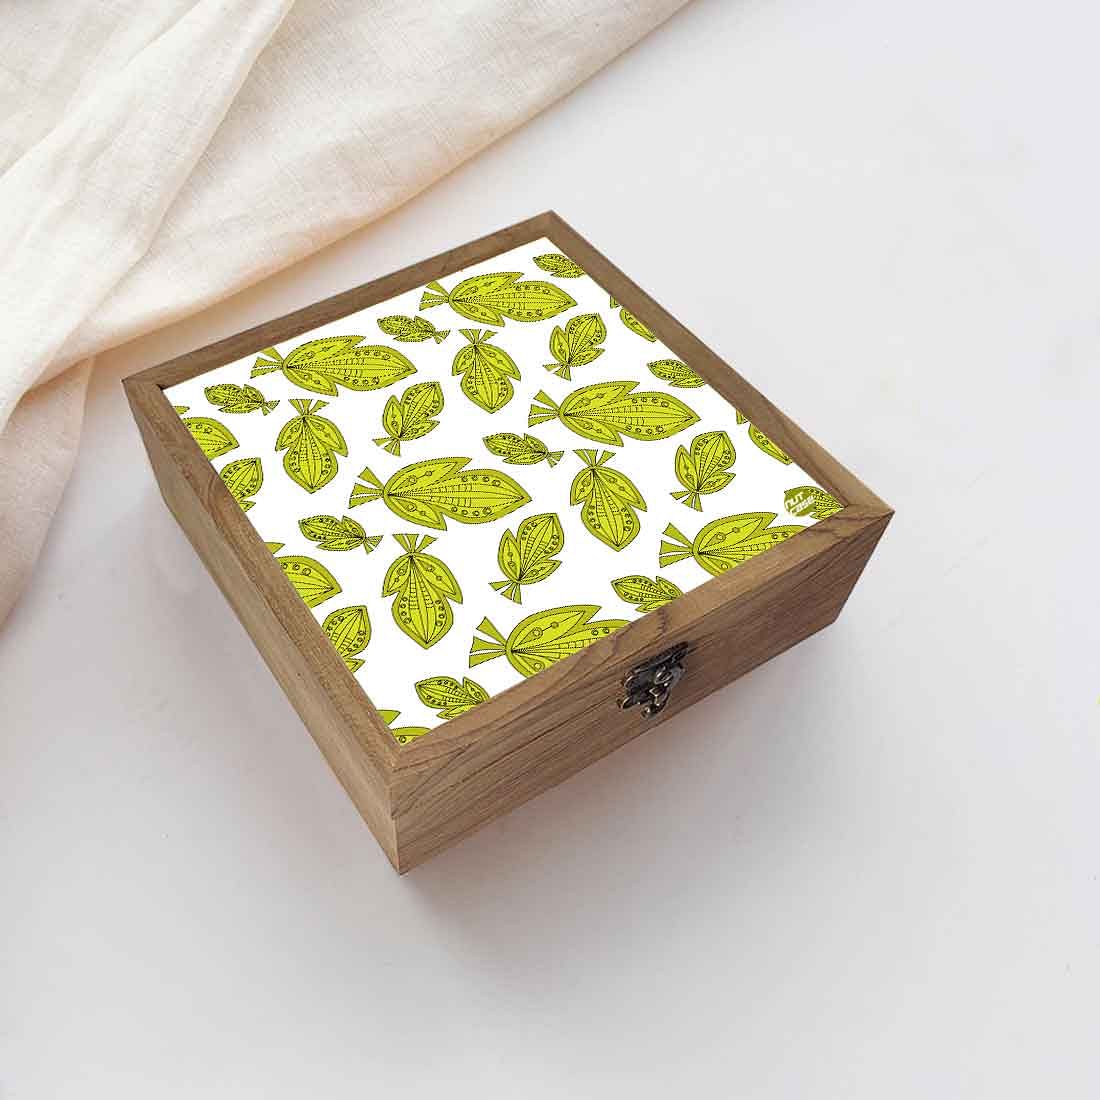 Nutcase Designer Wooden Jewellery Box Organizer  - Unique Gifts -Green Leaf Summer Collection Nutcase